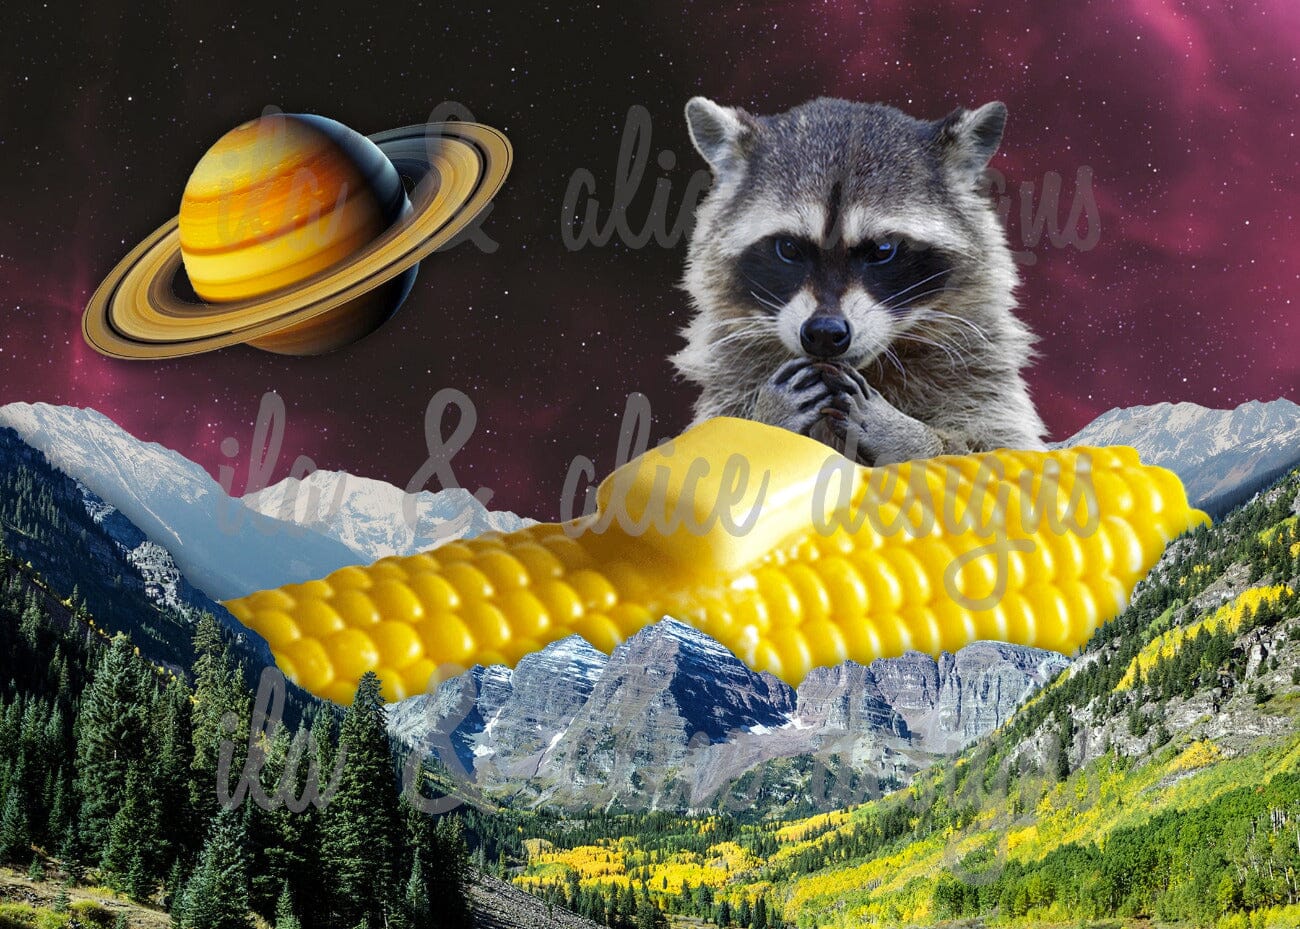 Funny Sci Fi Animals in Surreal Collage Art Postcards Post Cards ila & alice 